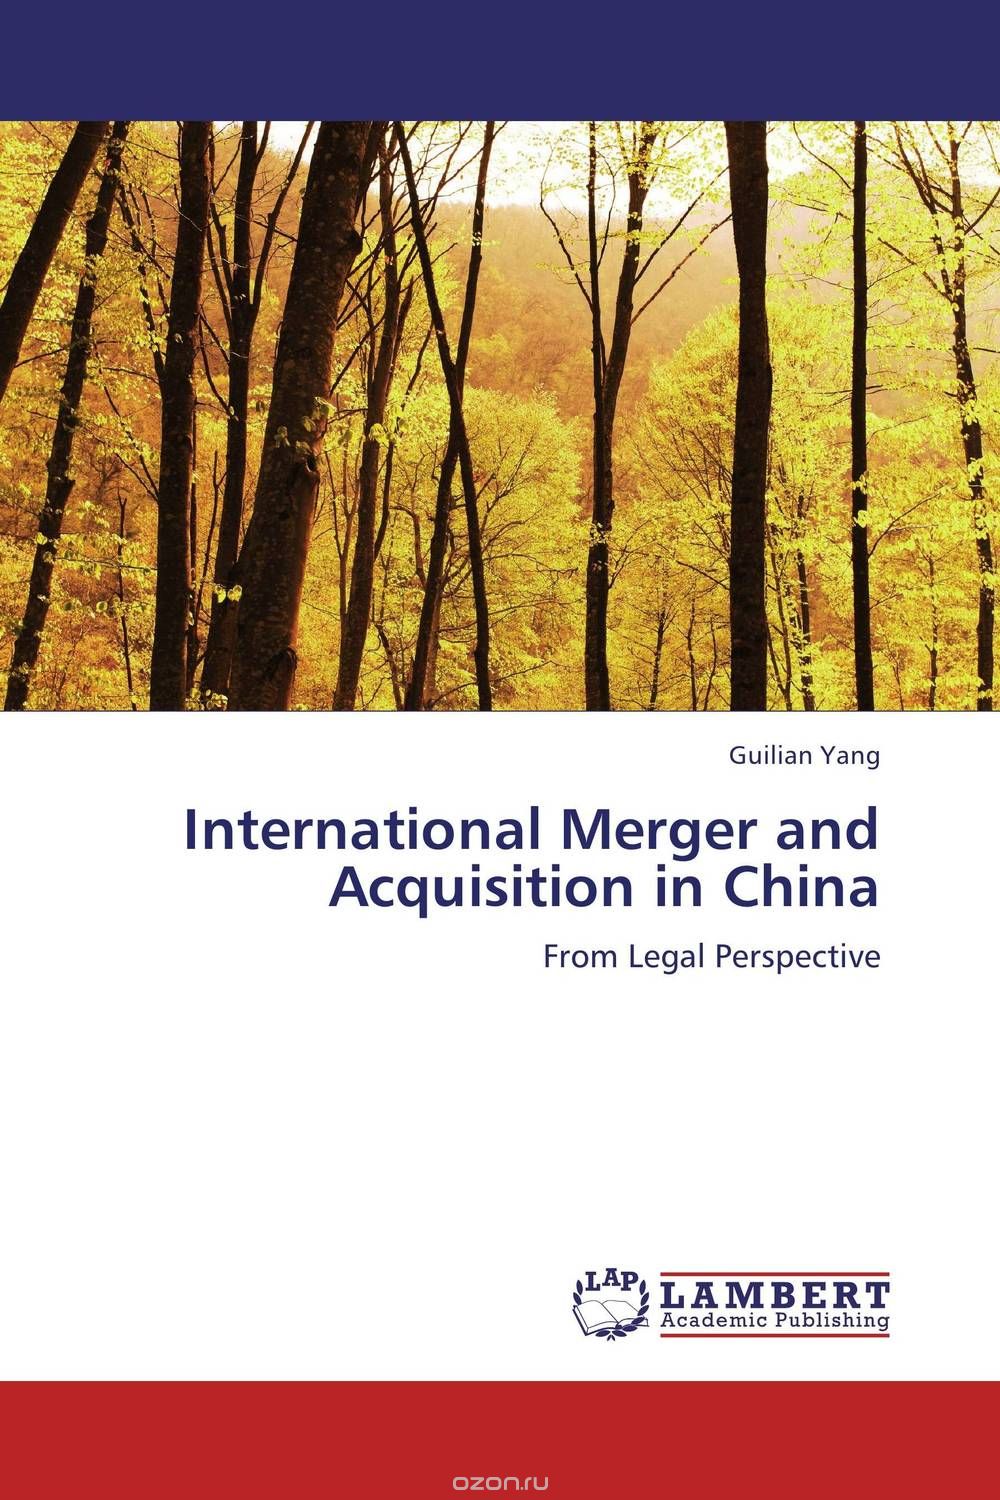 International Merger and Acquisition in China